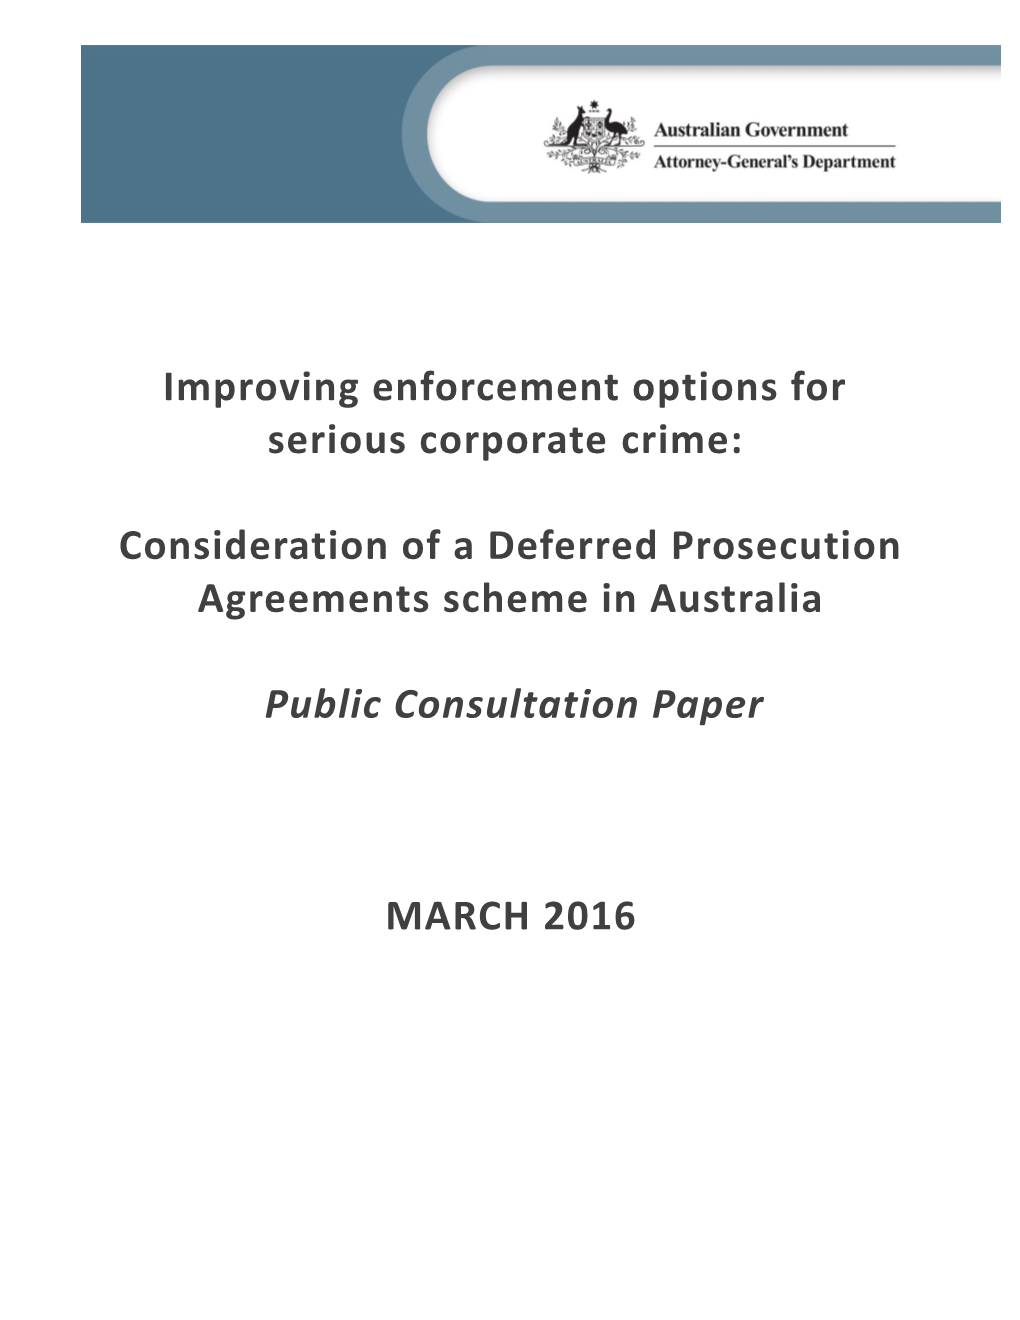 Deferred Prosecution Agreements - Discussion Paper